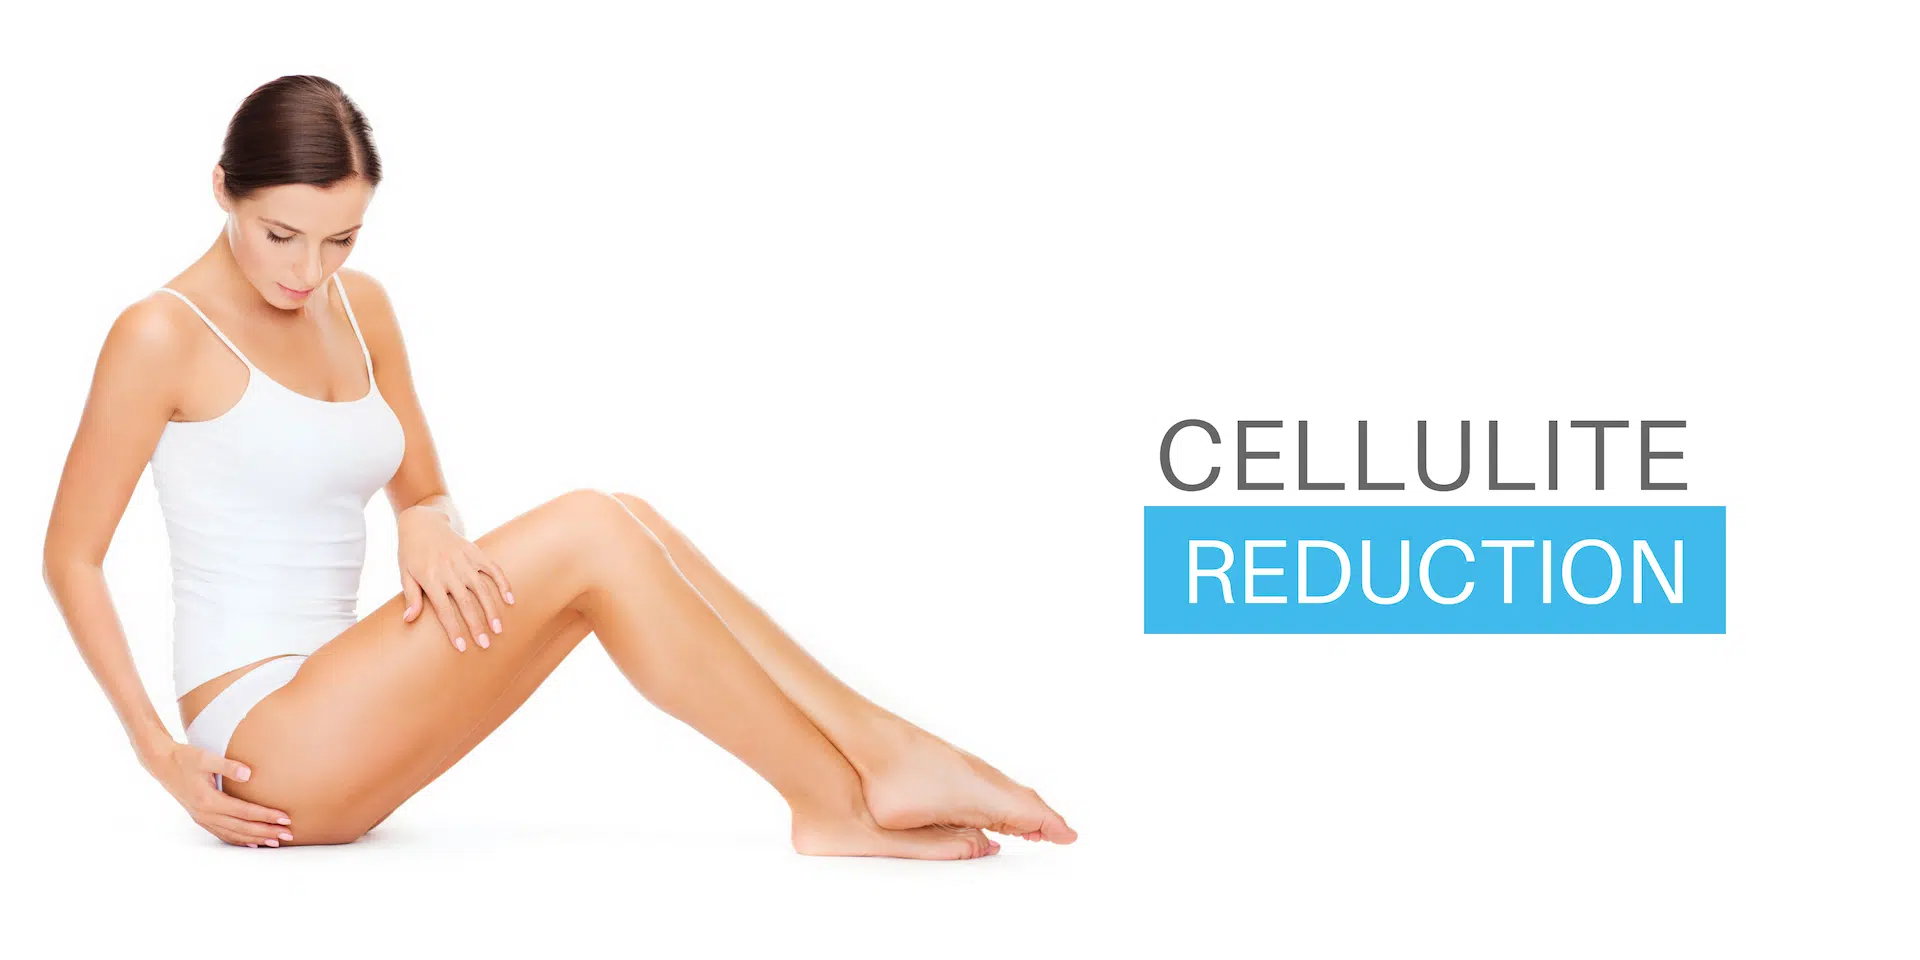 CELLULITE TREATMENT: REDUCE CELLULITE WITH CELLUTONE